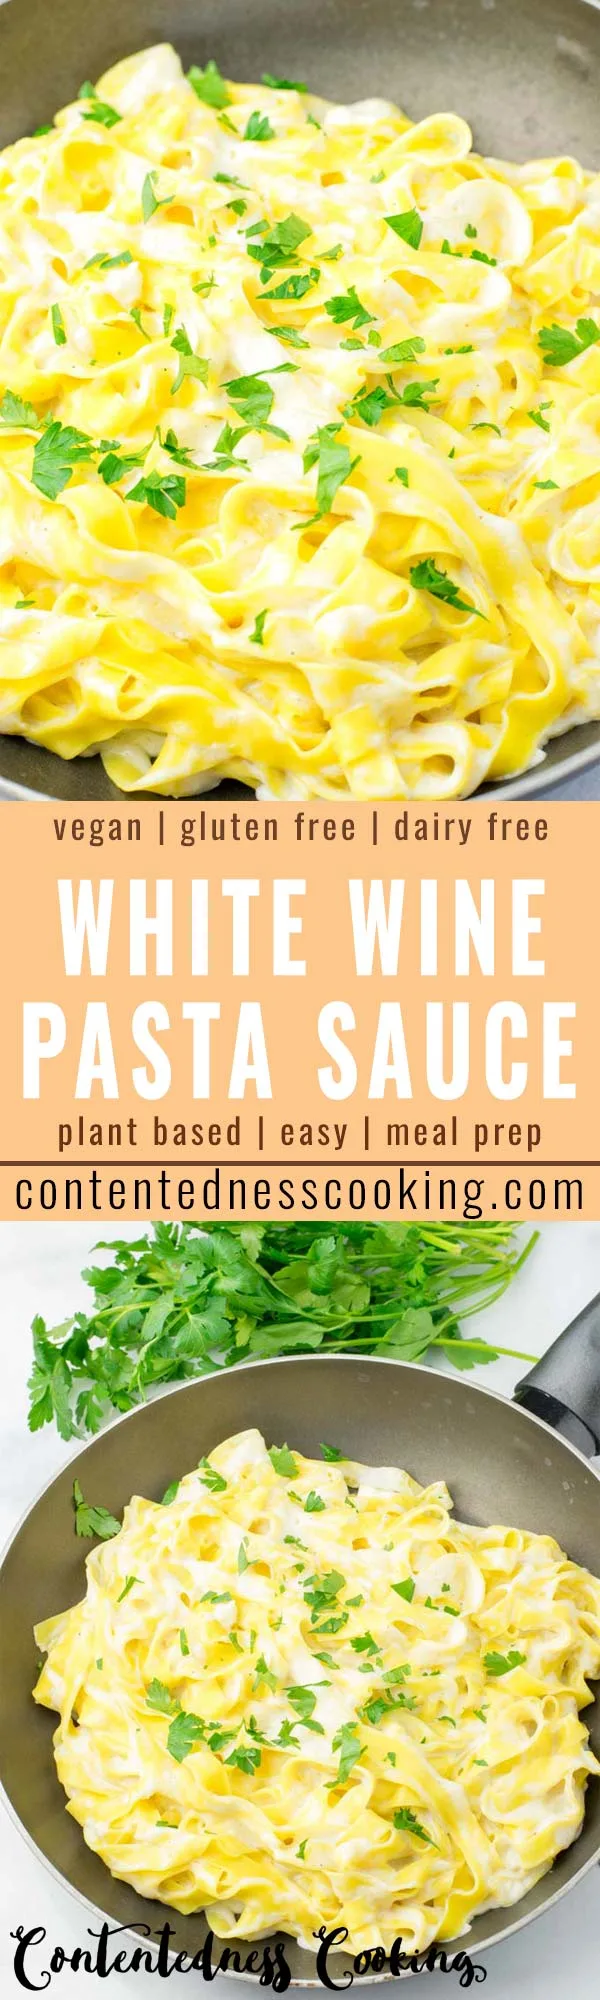 This White Wine Pasta Sauce is super easy to make and so comforting. Rich, creamy and no one would ever guess it is vegan and even gluten free. Serve it over your favorite pasta for lunch, dinner, meal prep and even date night dinners perfect for two! #vegan #dairyfree #glutenfree #vegetarian #contentednesscooking #pasta #mealprep #comfortfood #whitewinesauce #whitewinepastasauce #datenightdinners 